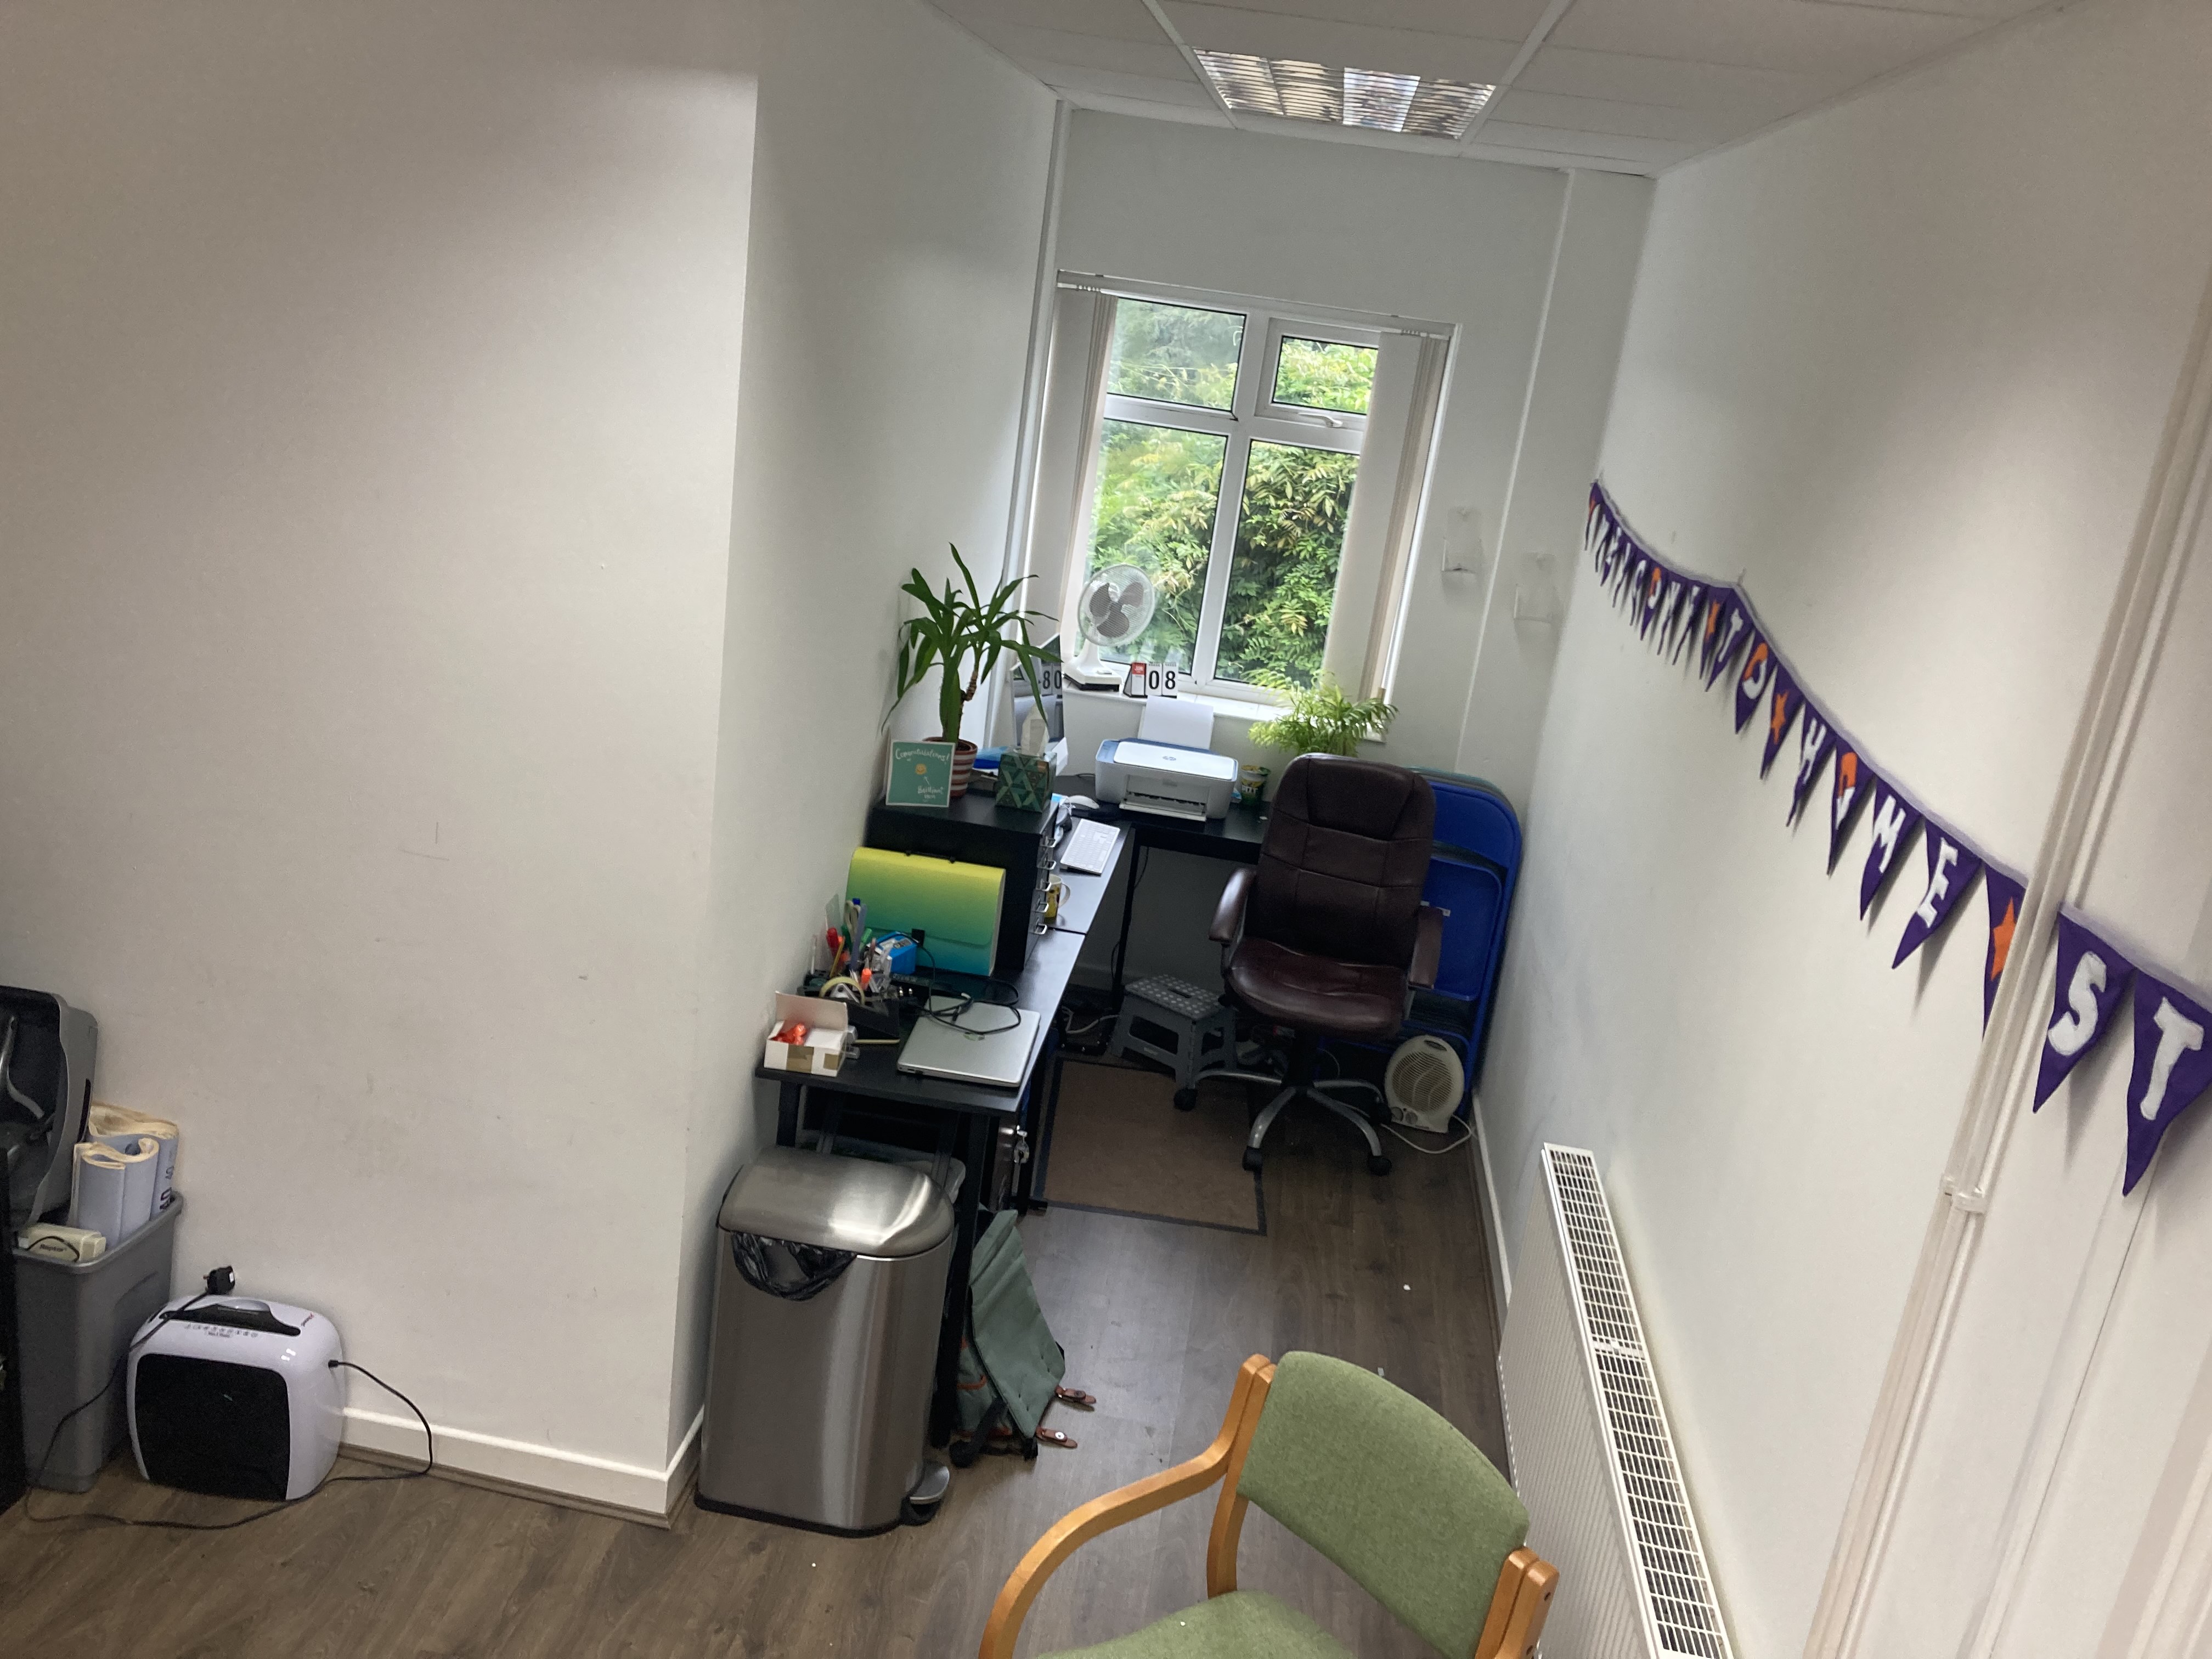 Rent work space in the High Peak